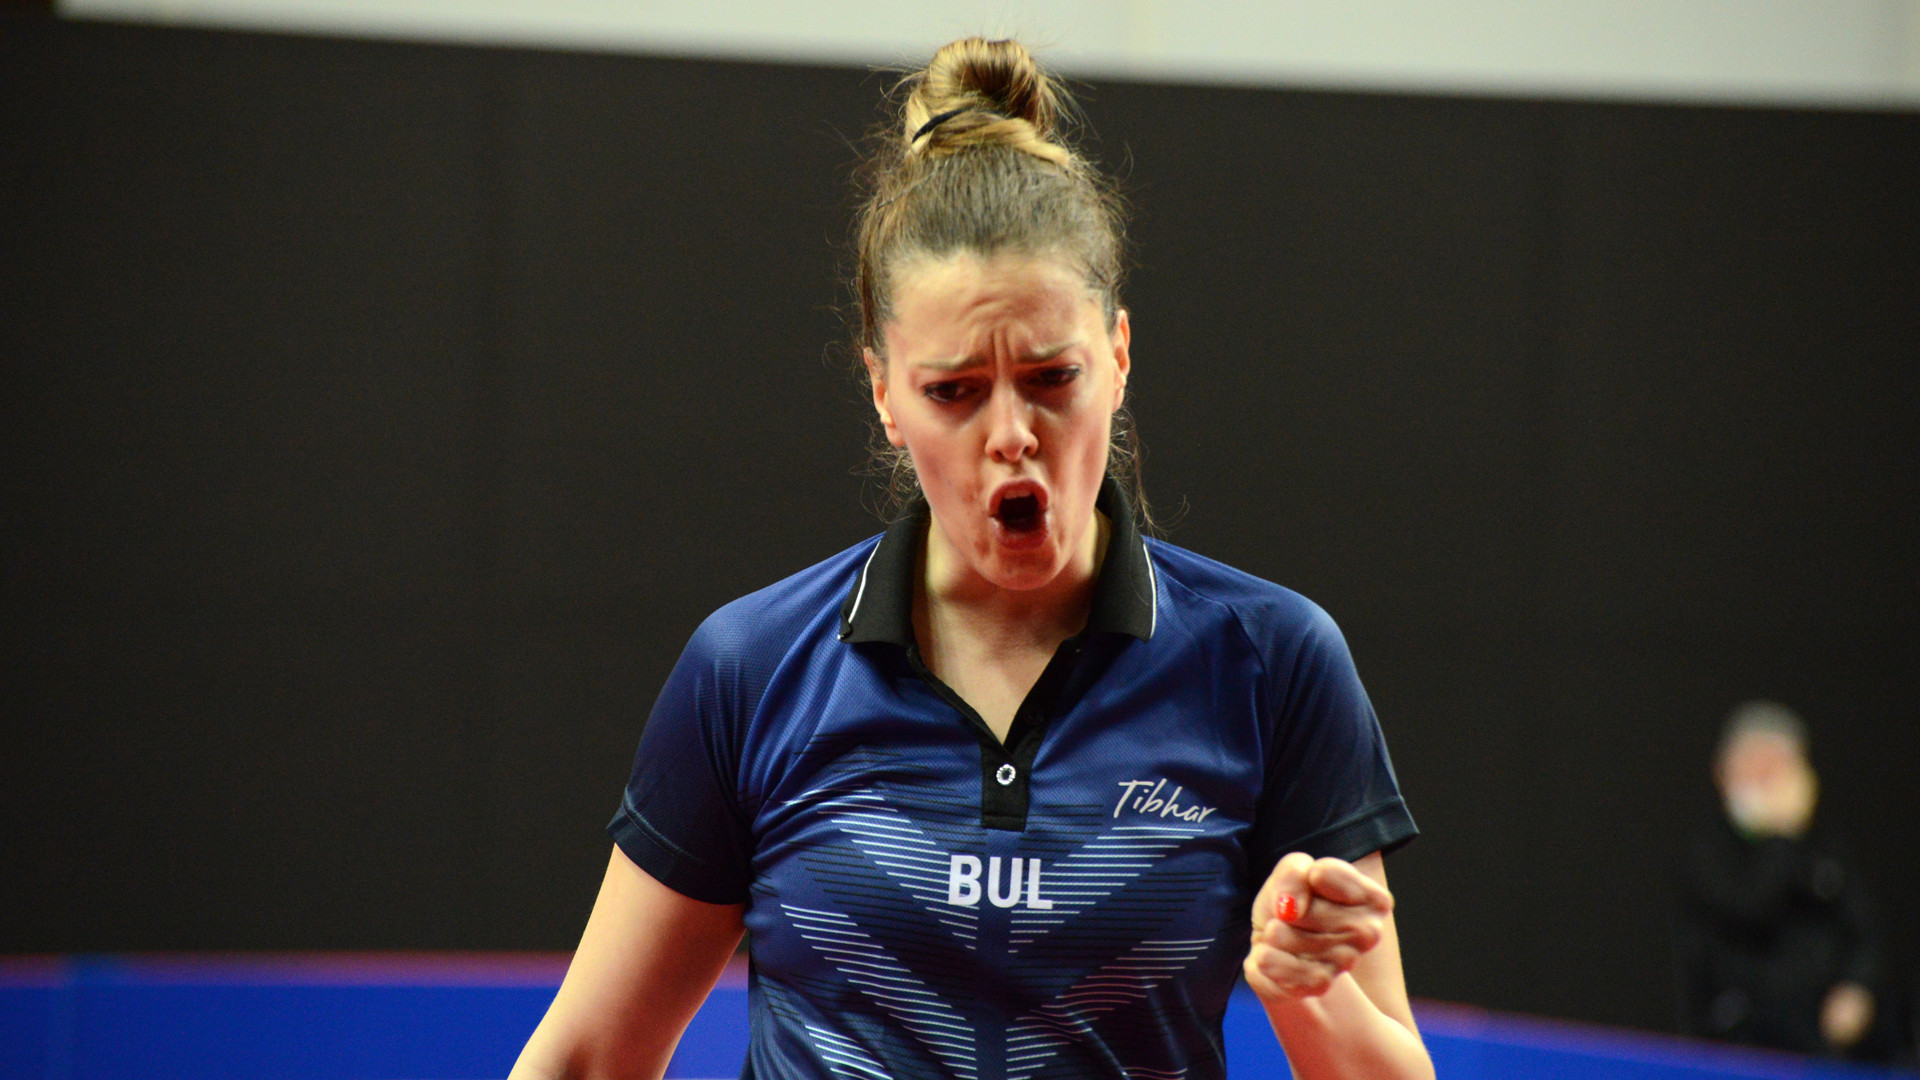 Bulgaria’s Polina Trifonova was a surprise qualifier into the knockout phase of the ITTF European Olympic Singles Qualification in Portugal ©ITTF